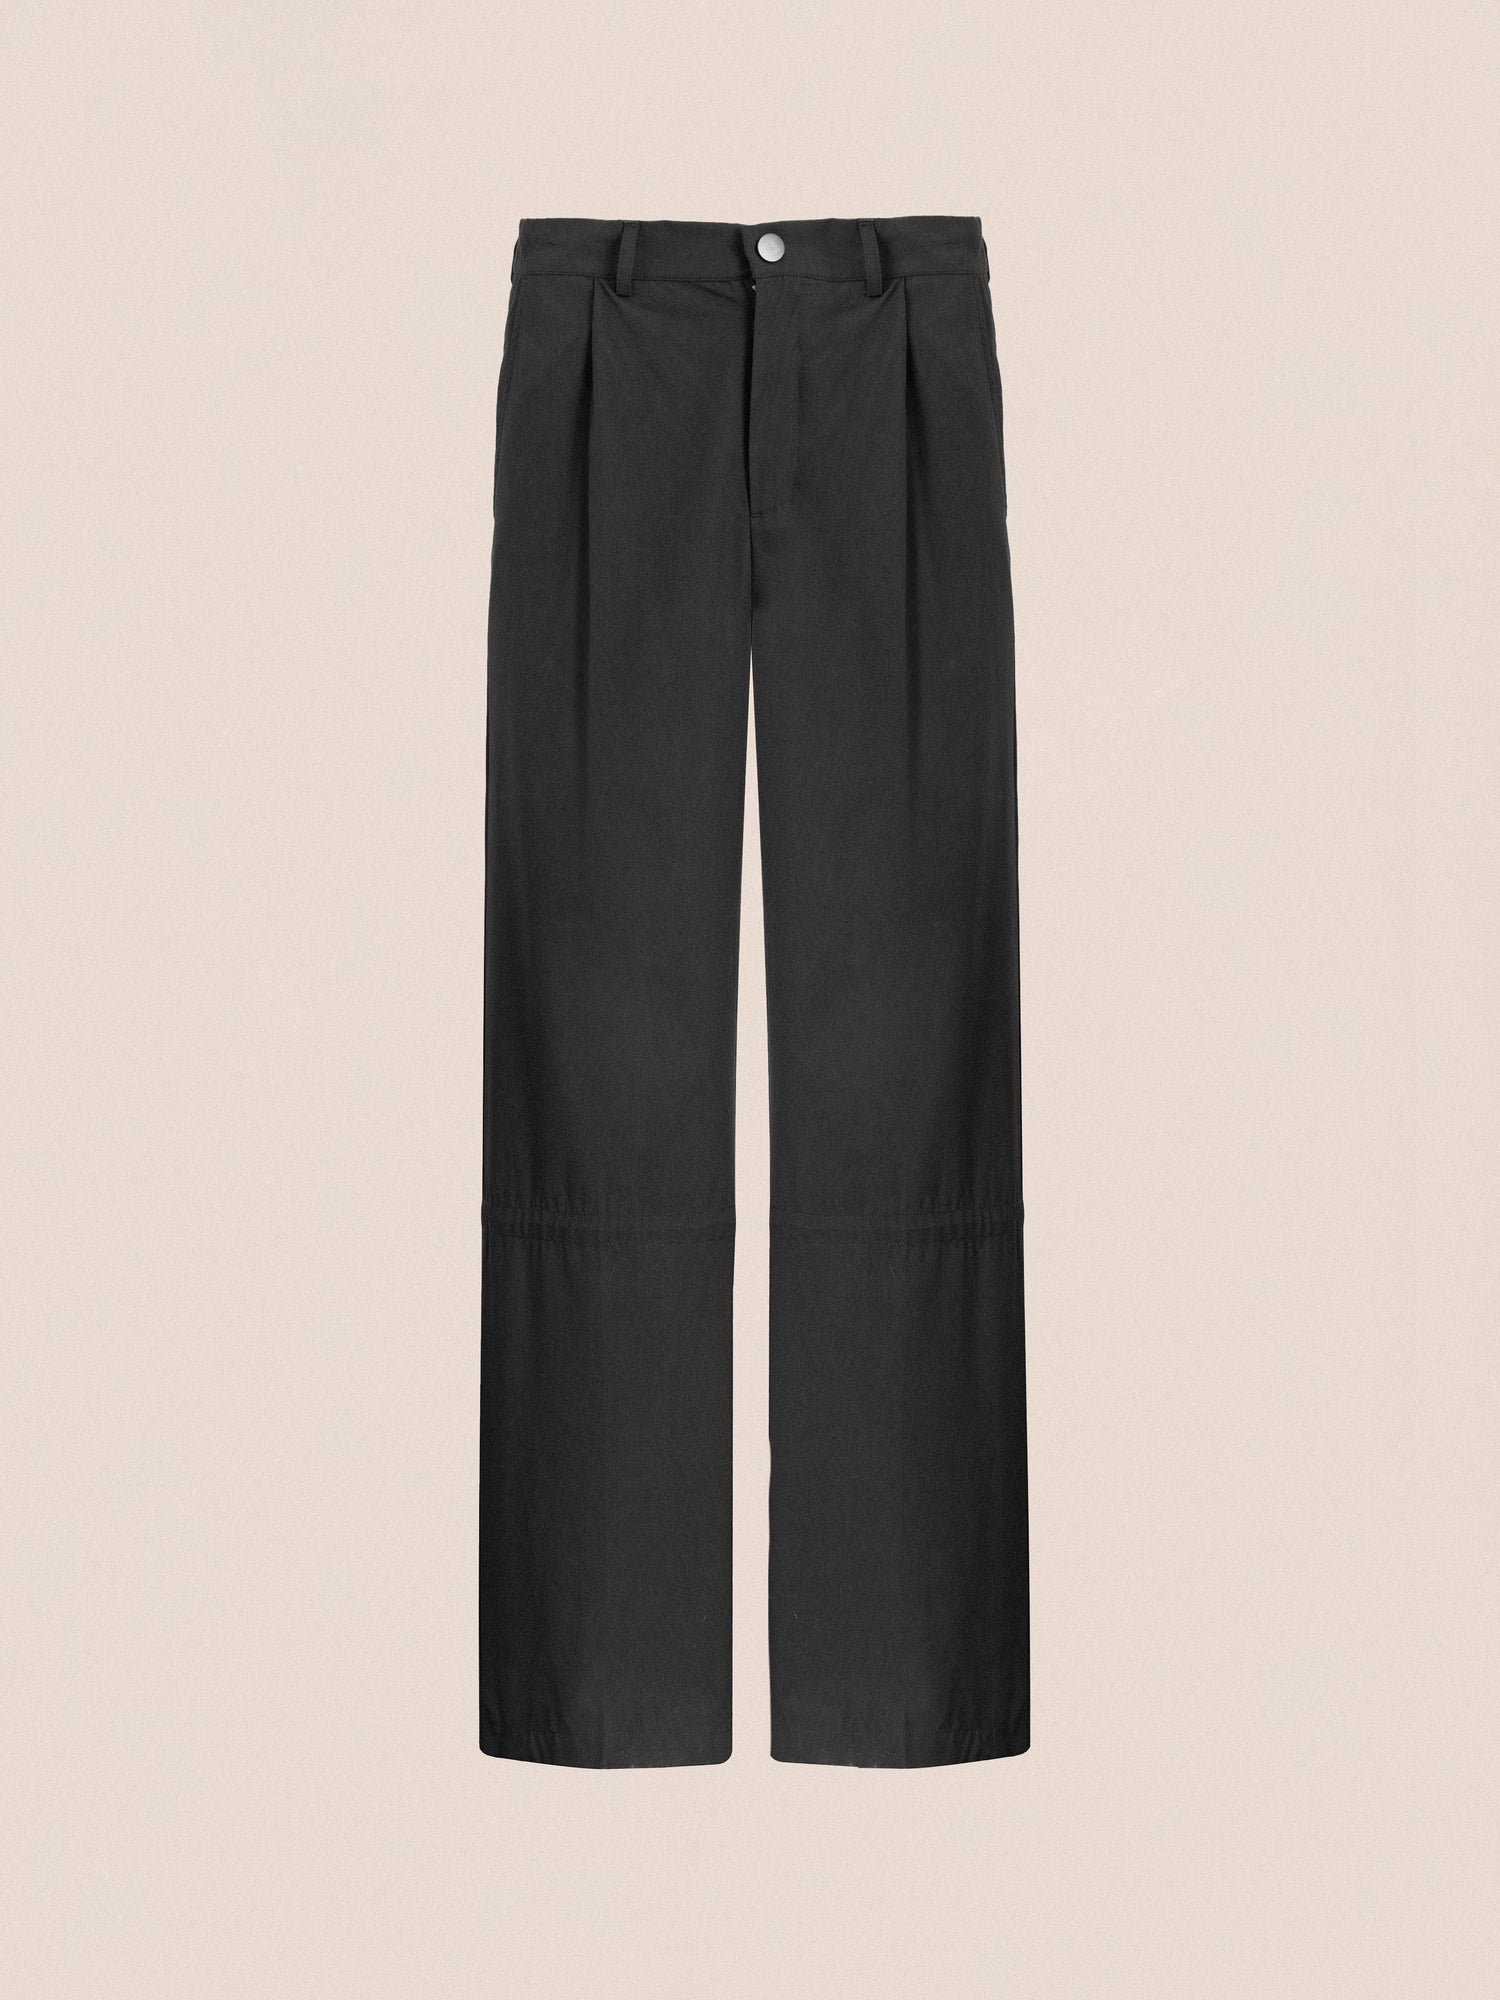 Found Tencel Pleated Pants with a button closure, displayed against a plain light pink background.